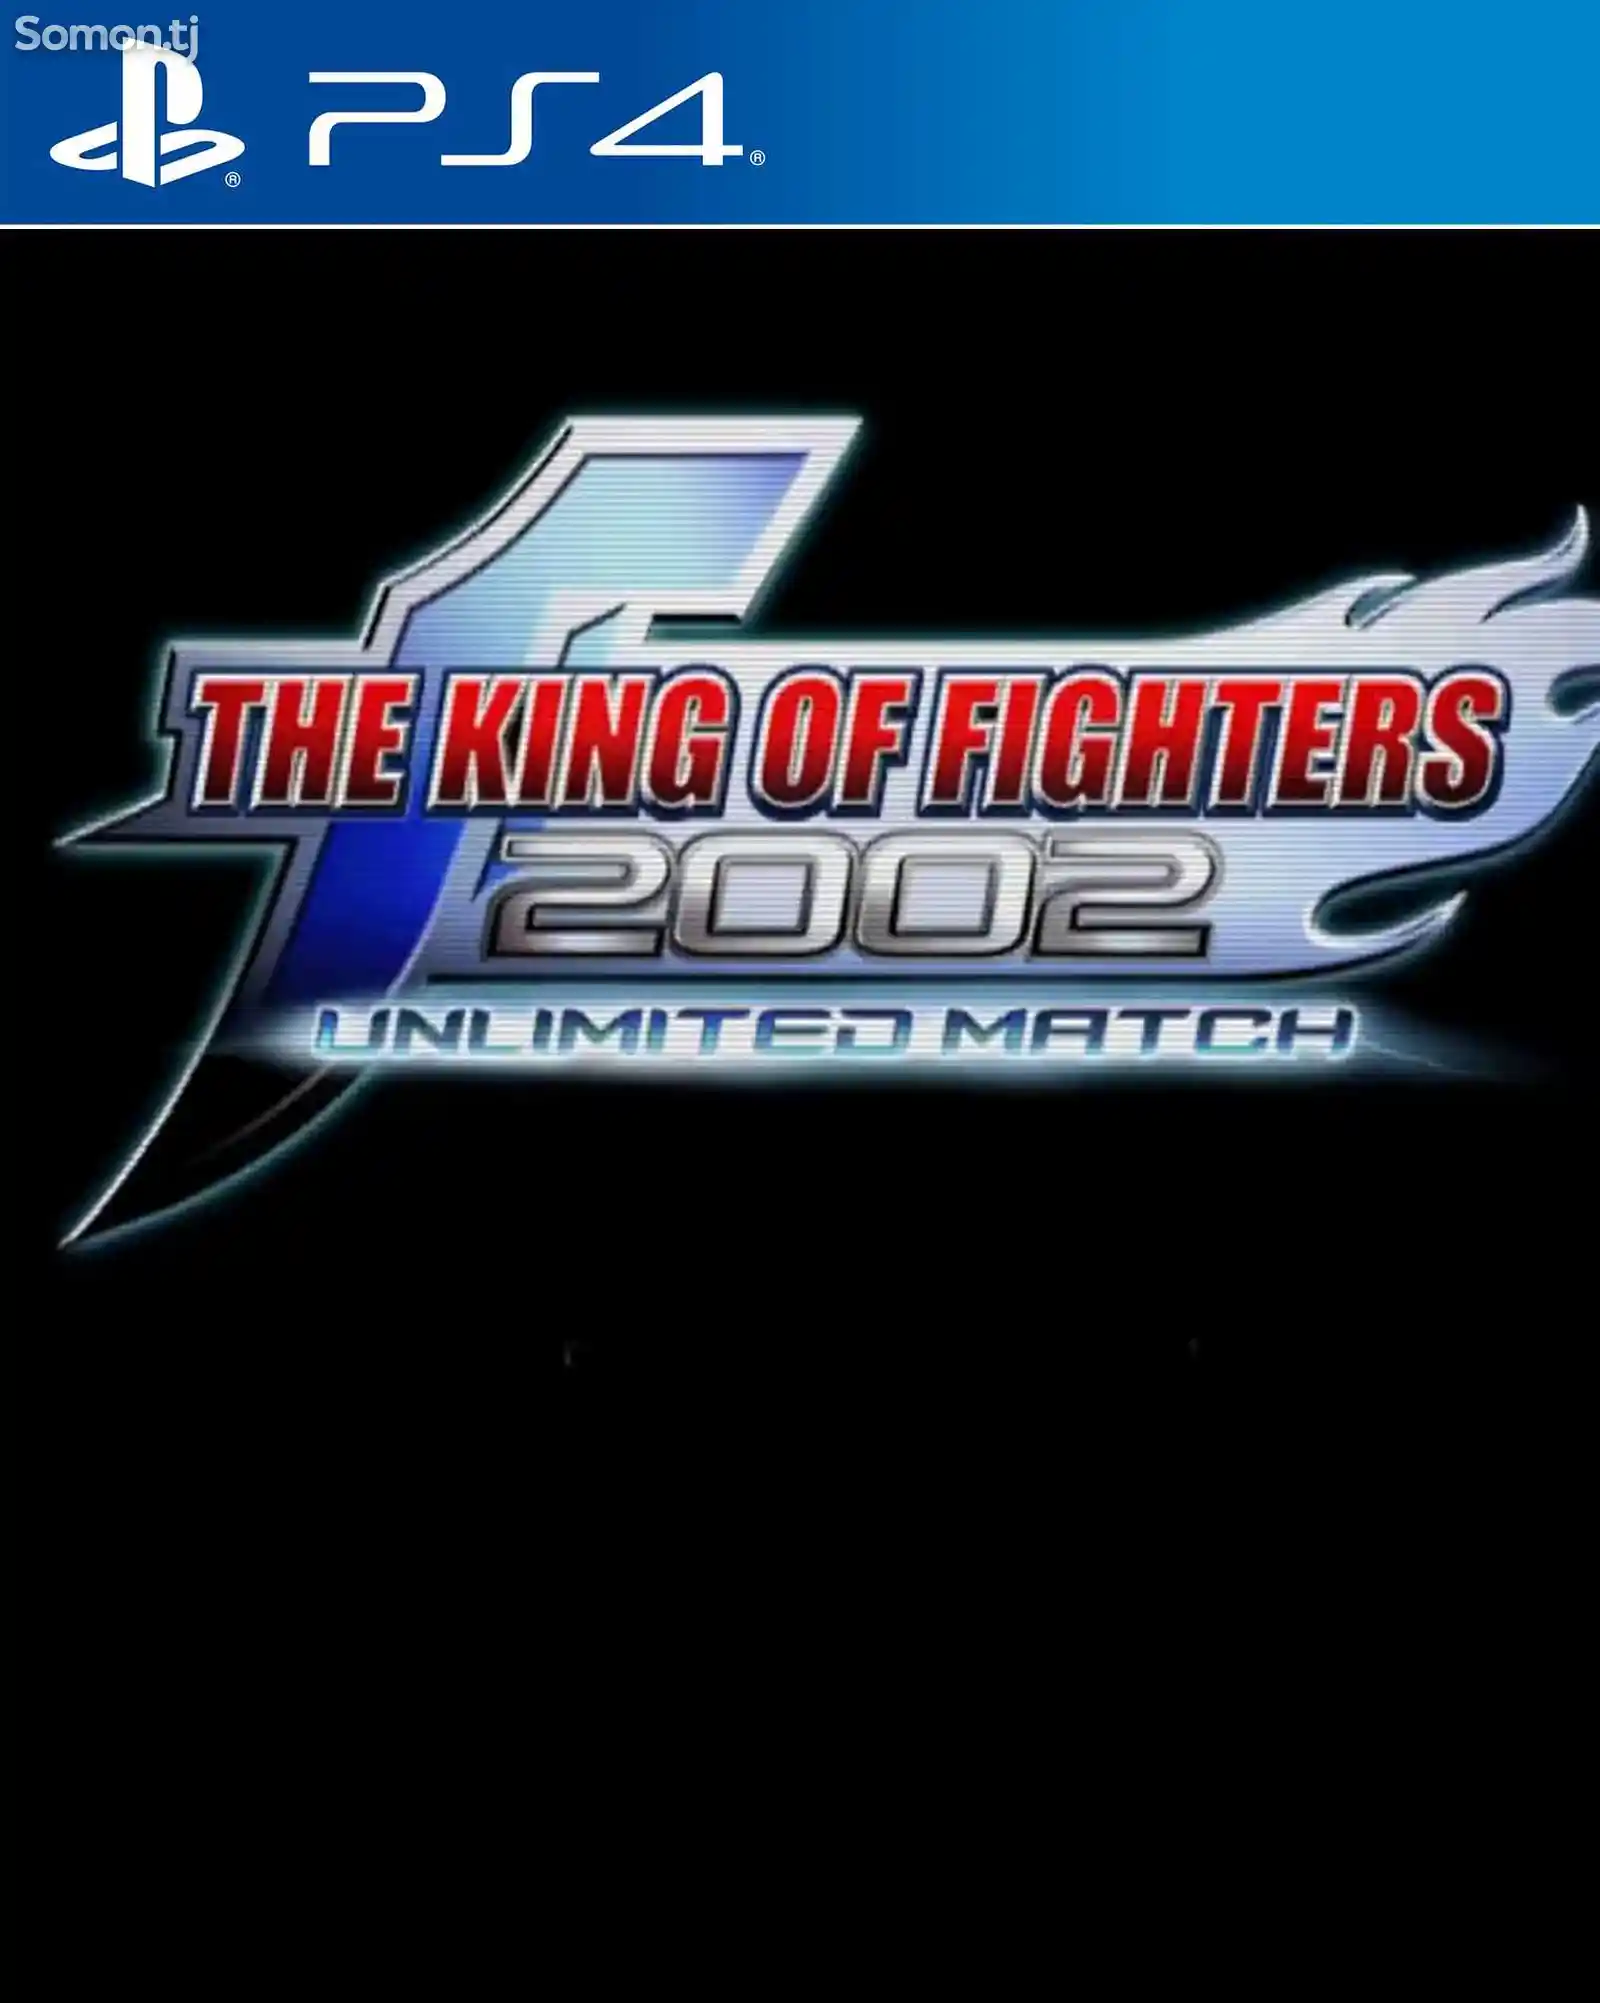 Игра The king of the fighters 2002 unlimited match для PS-4 / 6.72 / 9.00-1